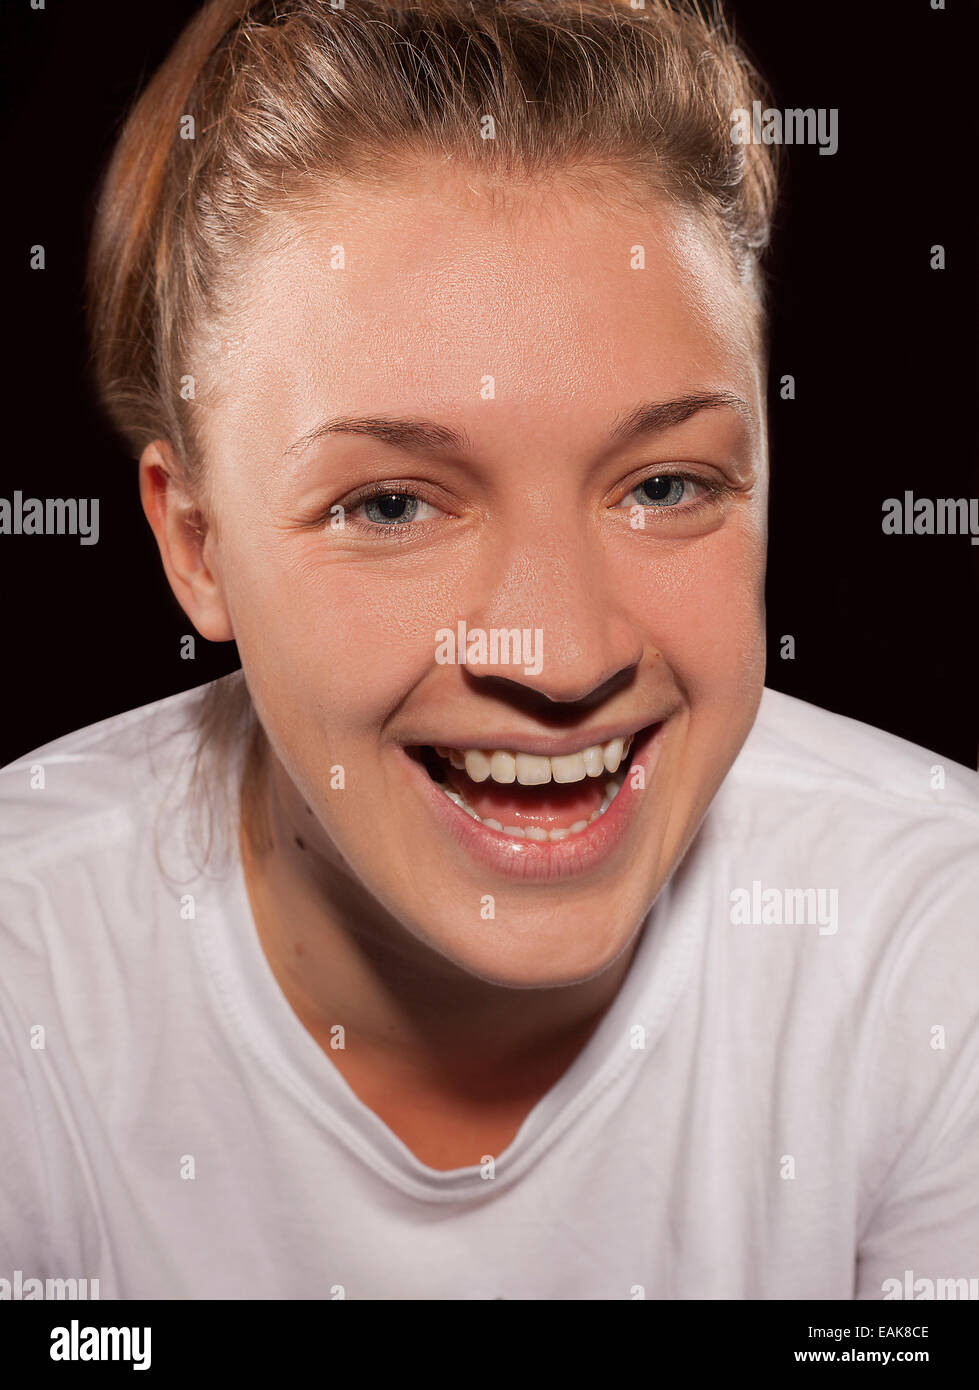 A color photograph of a white European female age 20-25 shot in casual clothes in a studio against a black background Stock Photo